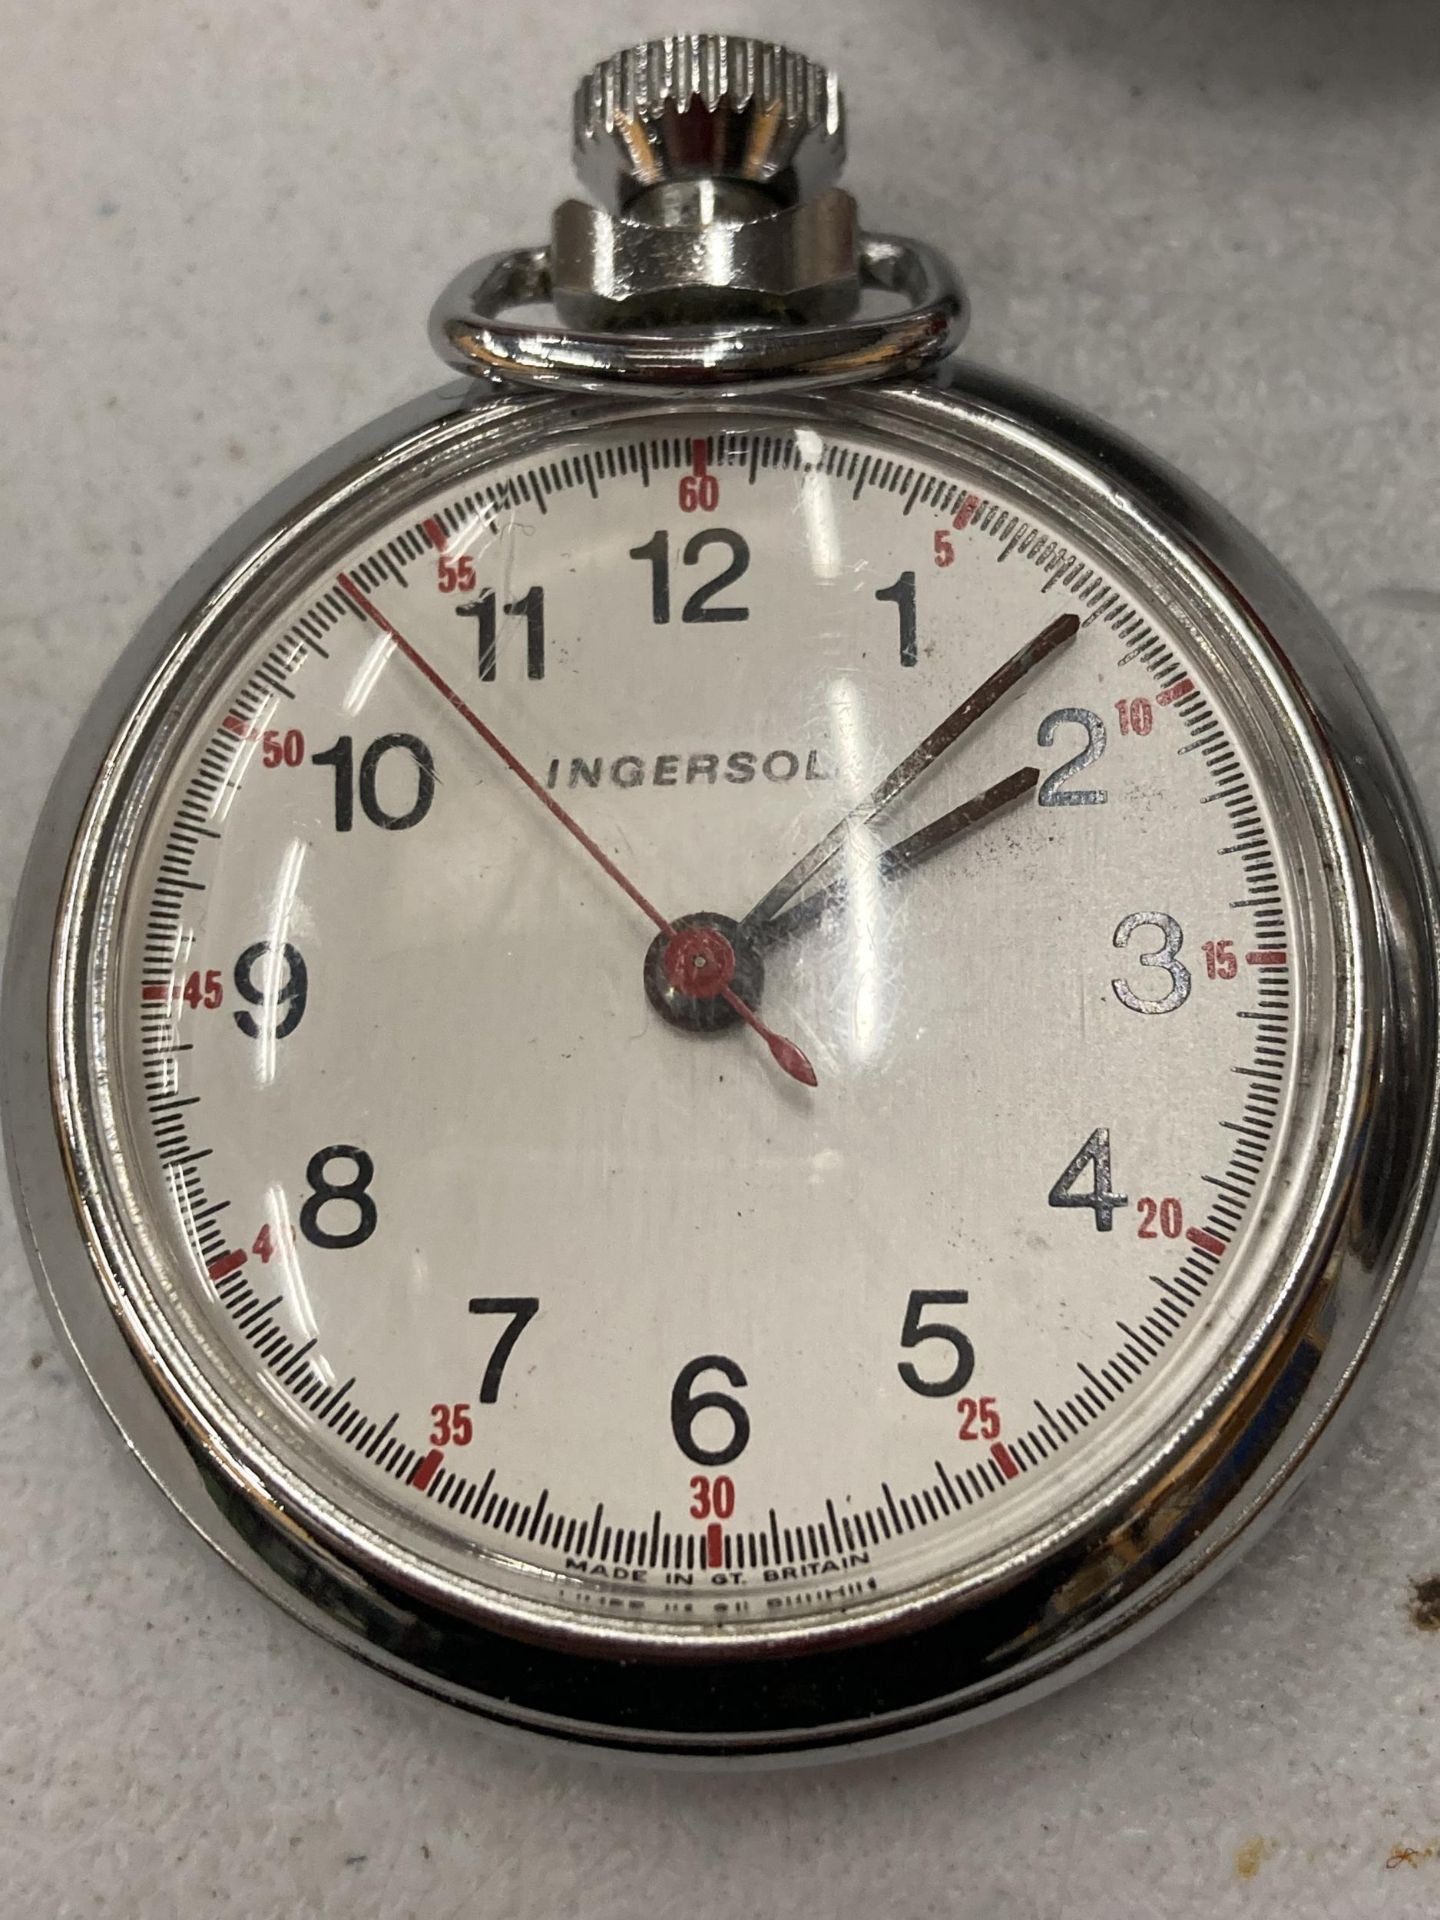 THREE VINTAGE INGERSOLL CHROME POCKET WATCHES, ALL BELIEVED WORKING - Image 4 of 5